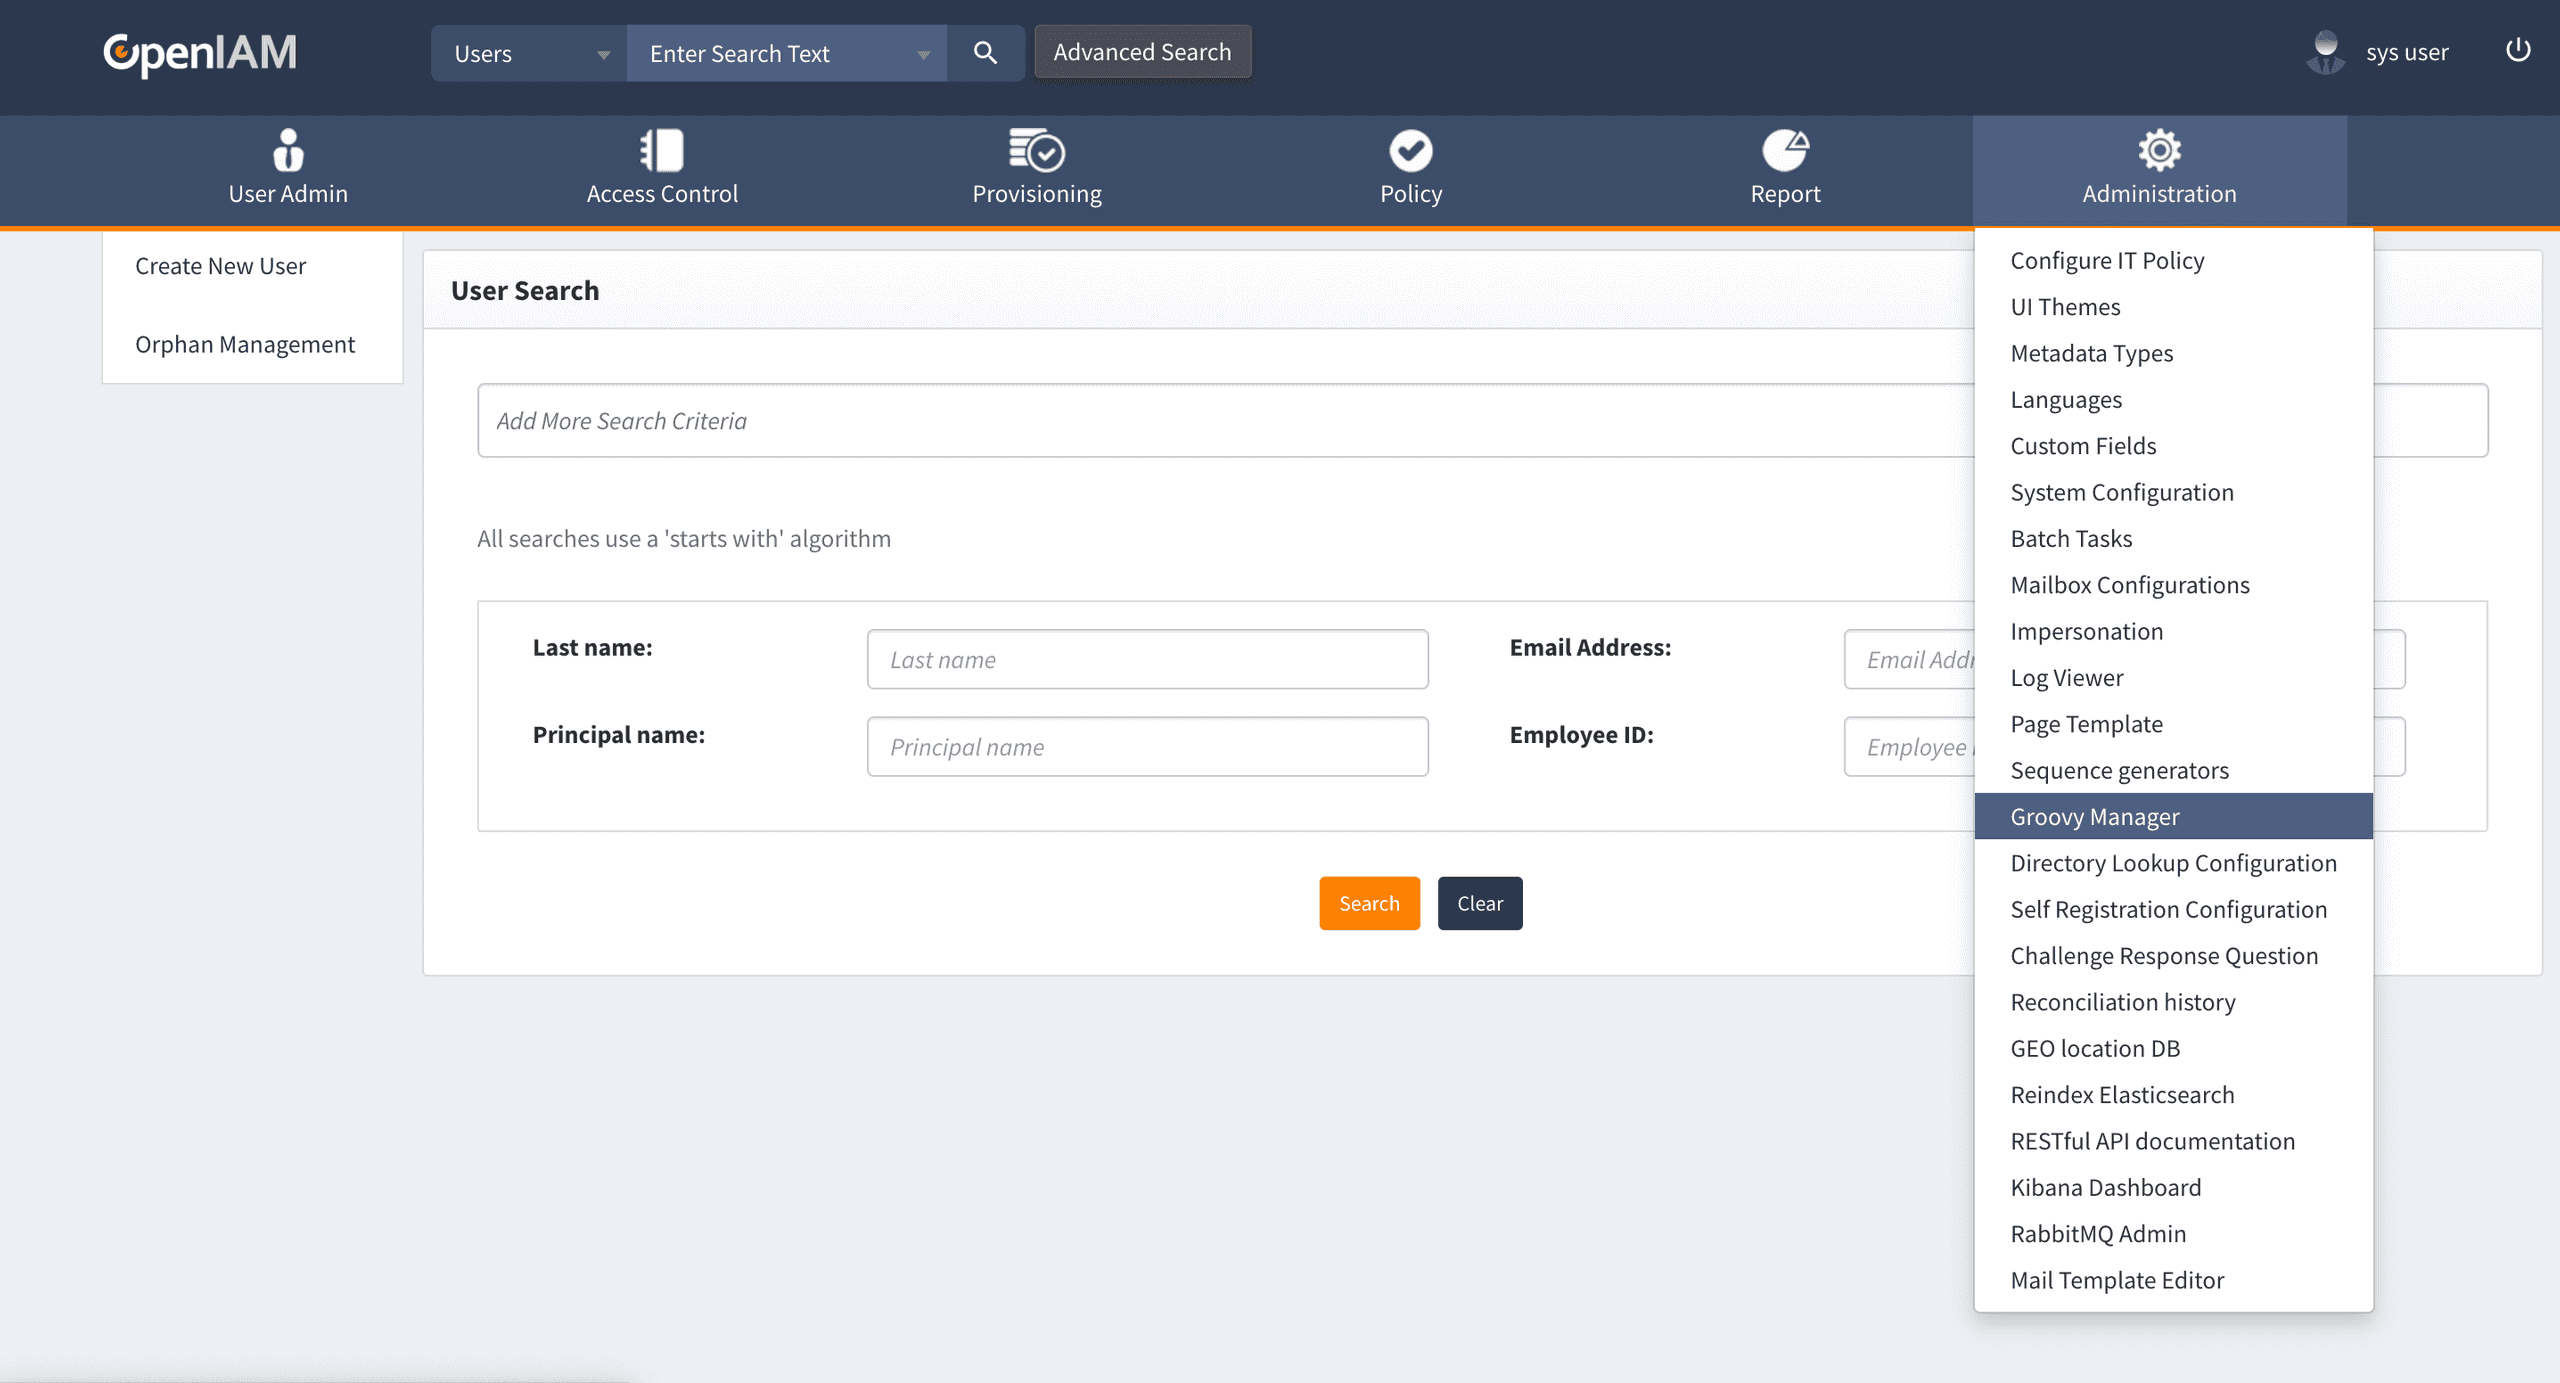 OpenIAM Administration Menu → Groovy Manager